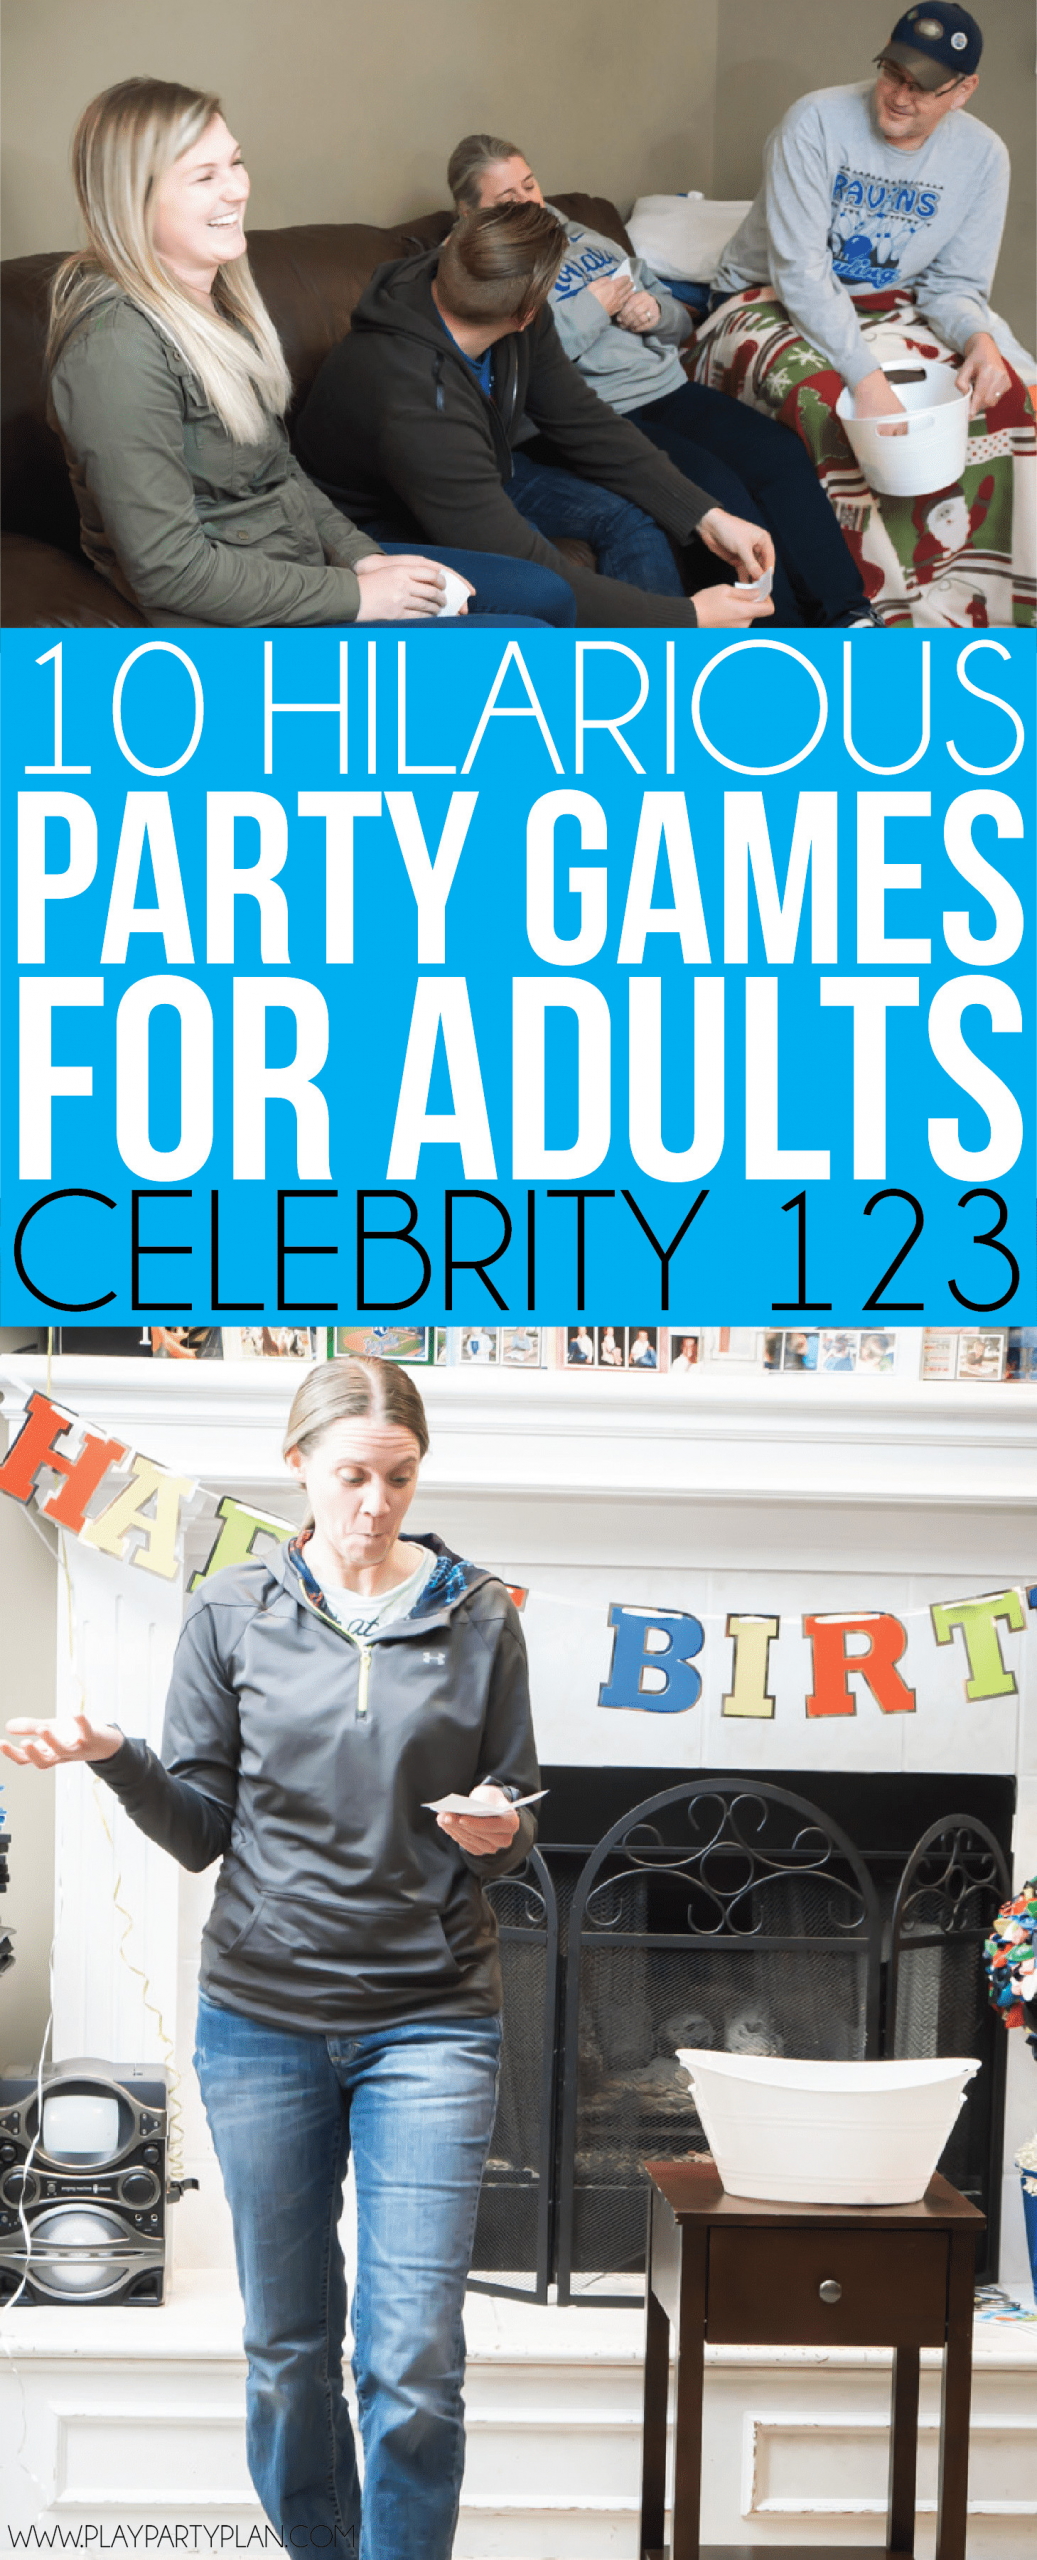 Fun Adult Activities
 19 Hilarious Party Games for Adults Play Party Plan